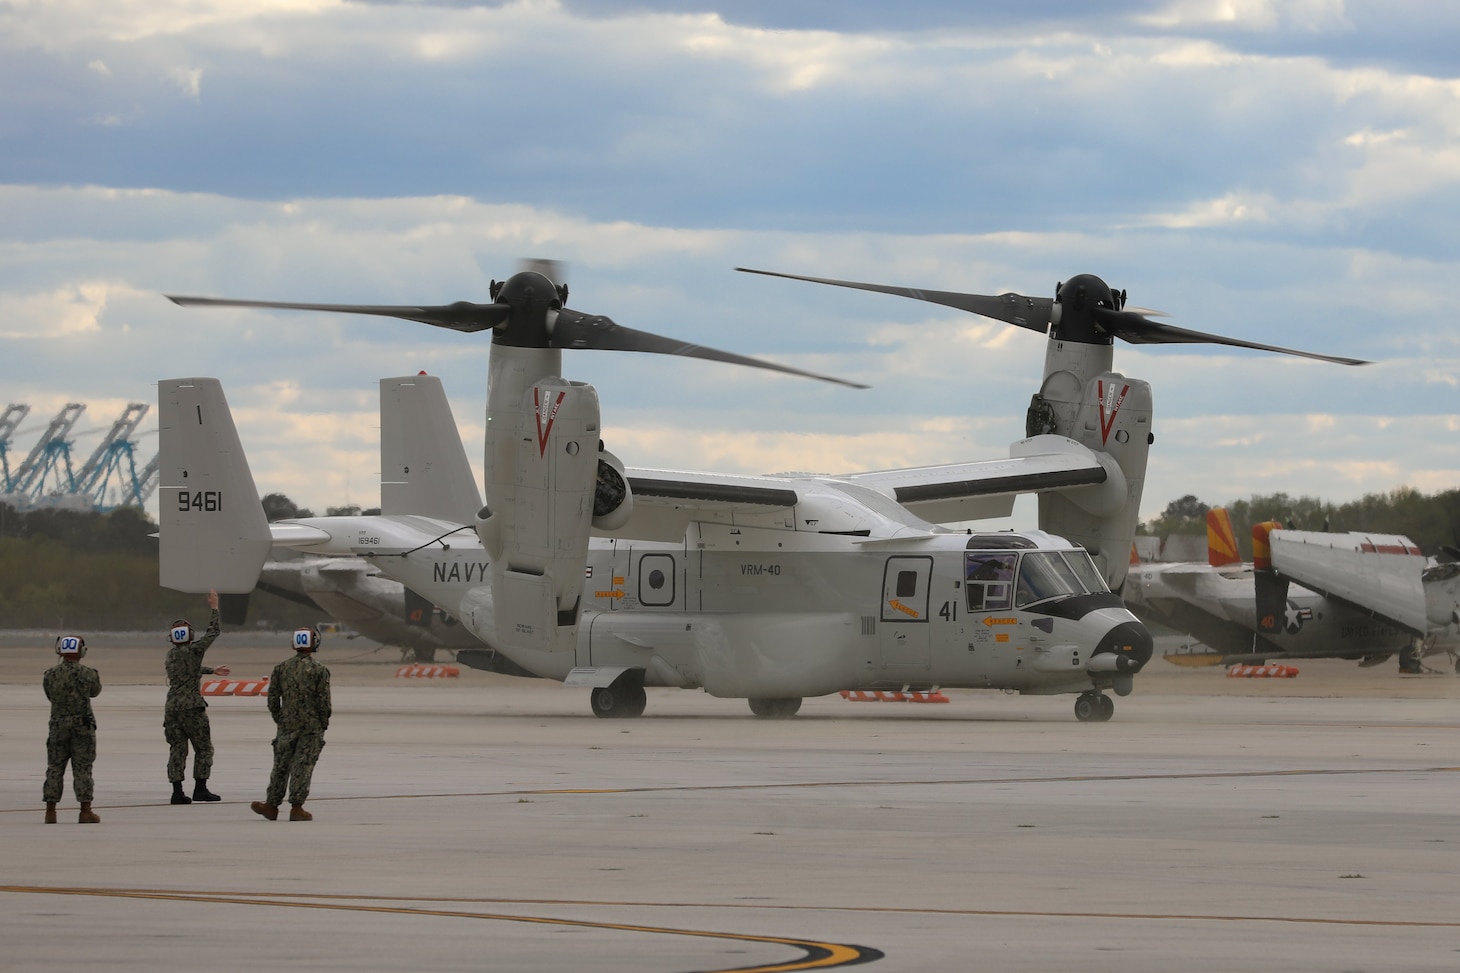 The first East Coast-assigned Navy tiltrotor vertical/short takeoff and landing (V/STOL) aircraft CMV-22B Osprey lands at Naval Station Norfolk, April 5. The CMV-22B Osprey belongs to Fleet Logistics Multi-Mission Squadron (VRM) 40 the “Mighty Bison.” The CMV-22B airframe will provide the fleet’s medium-lift and long-range aerial logistics capability, replacing the C-2A Greyhounds of Fleet Logistics Support Squadron (VRC) 40 over the next several years.